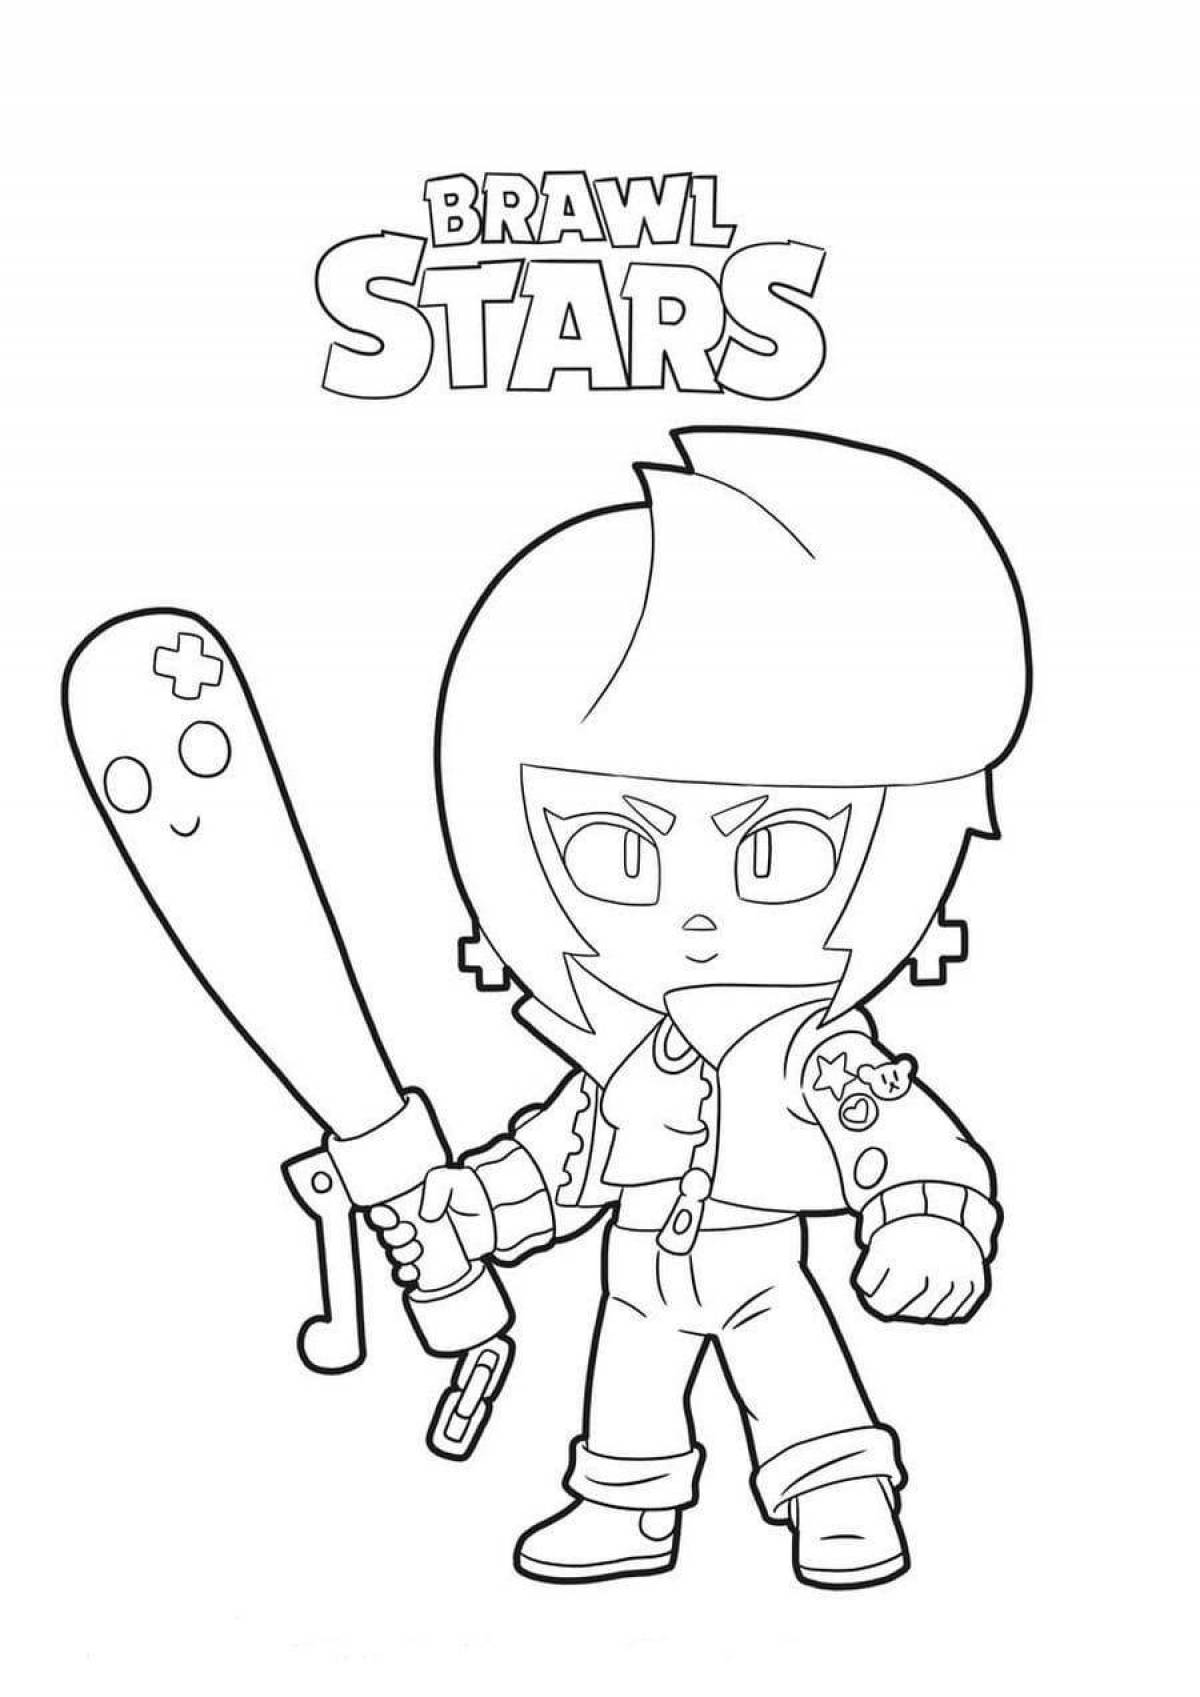 Exciting bravo stars max skin coloring page